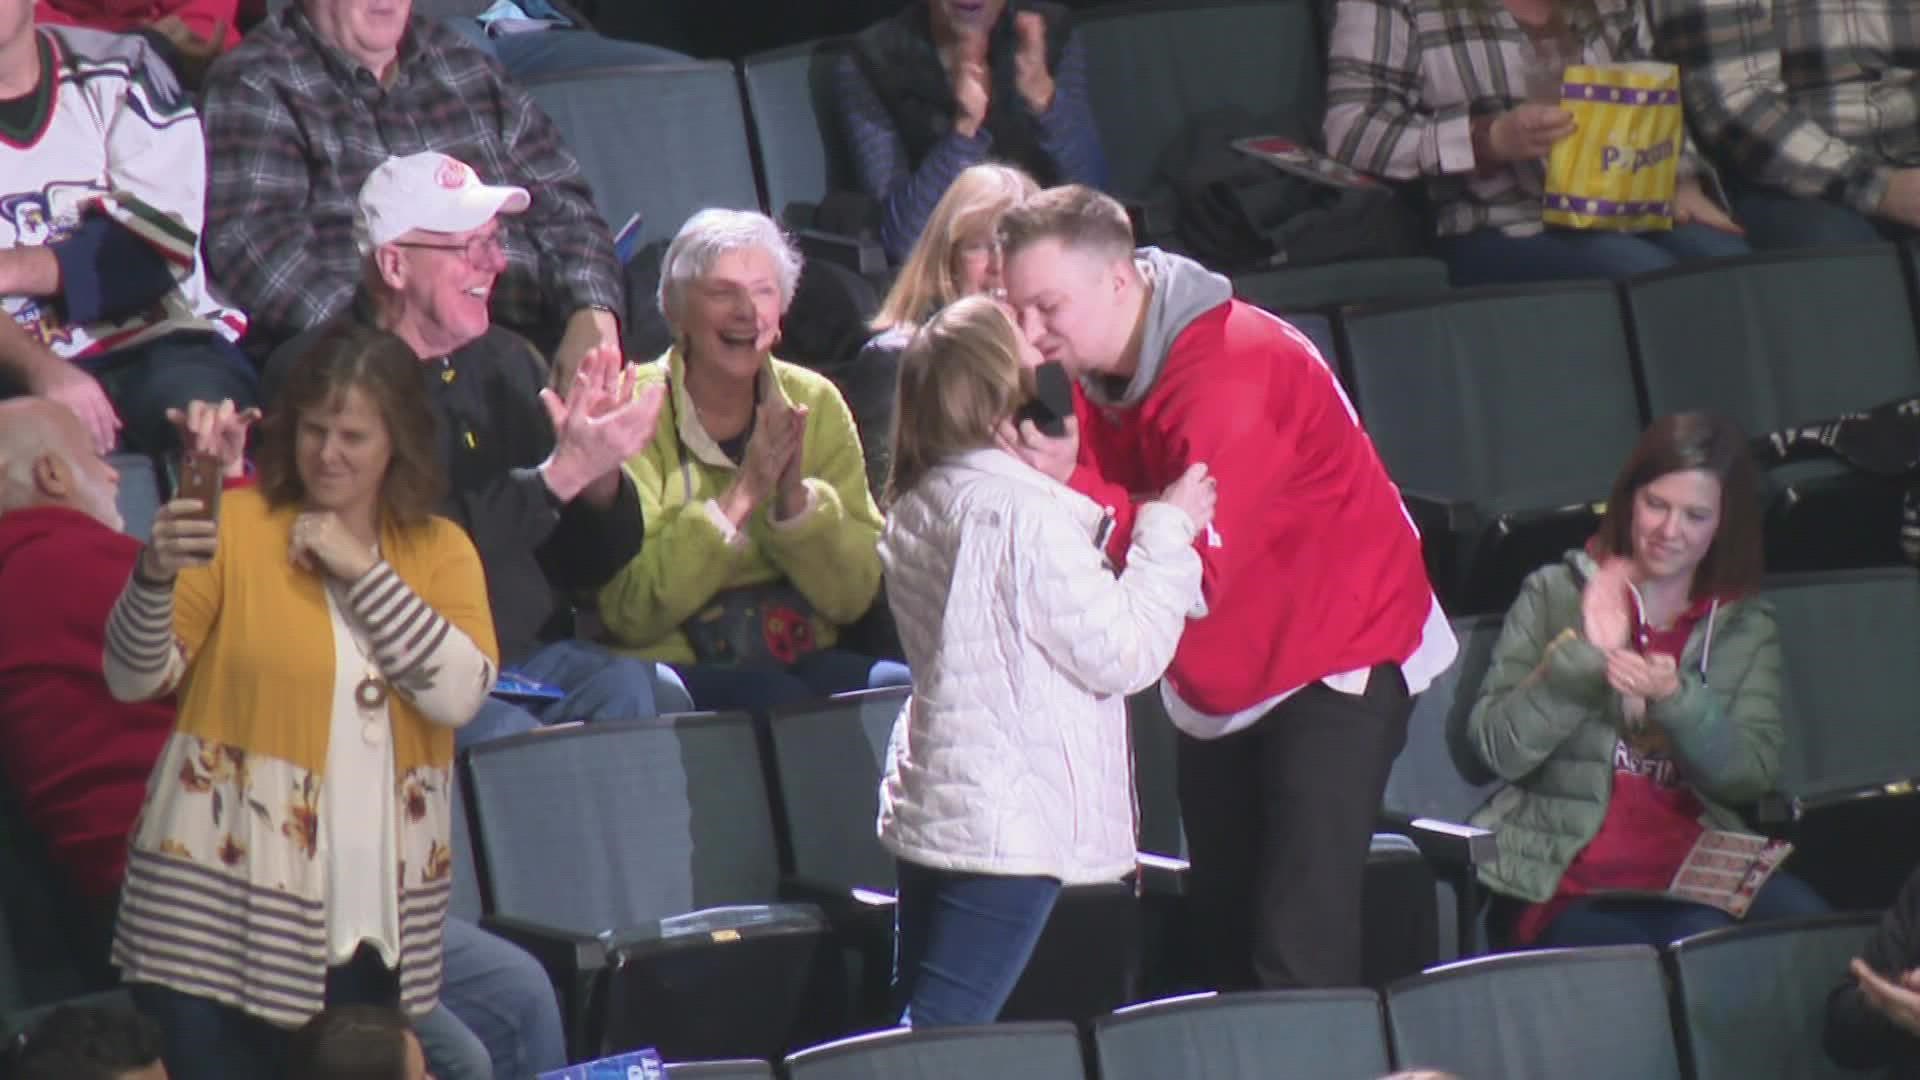 Sam Swain and Sally Creason got engaged at Friday's Griffins game. It was Sally's first Griffins game ever — and it came with the perfect surprise.